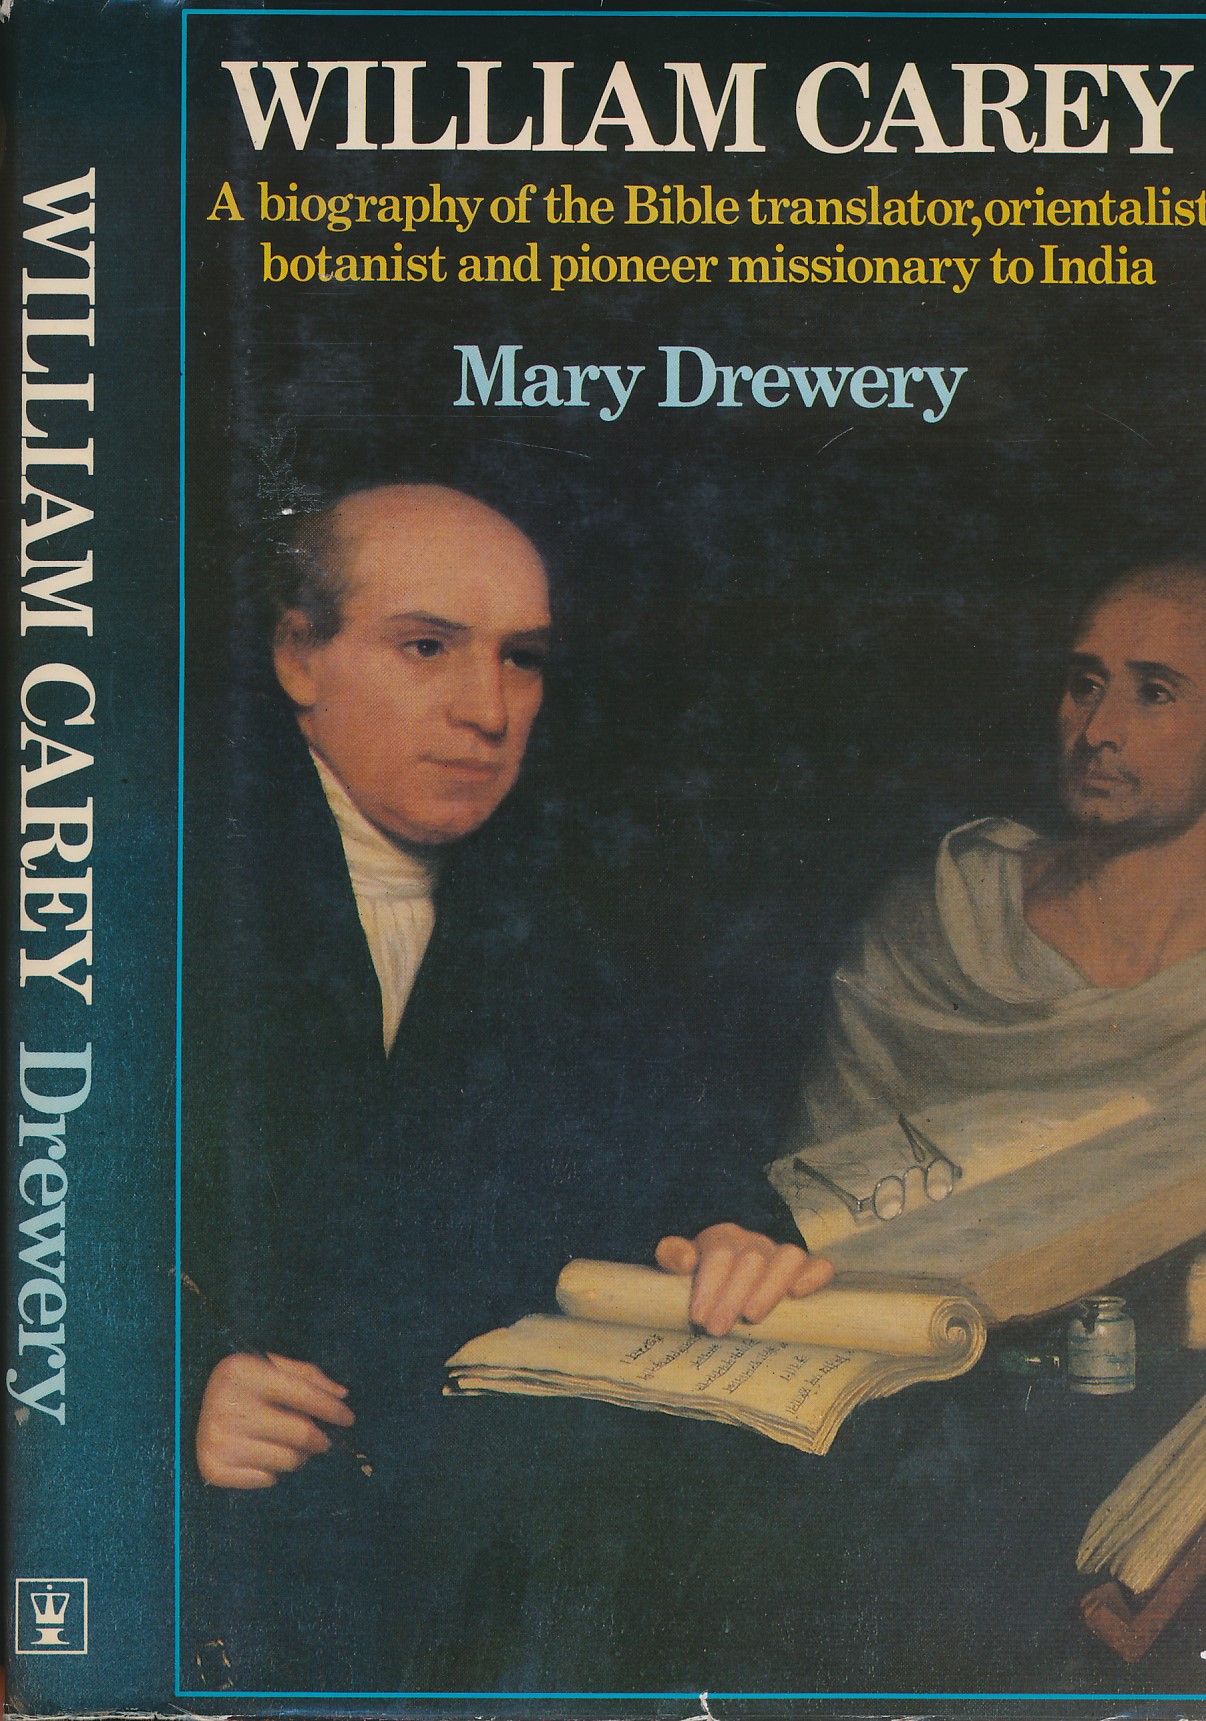 William Carey. A Biography of the Bible Translator, Orientalist Botanist and Pioneer Missionary to India